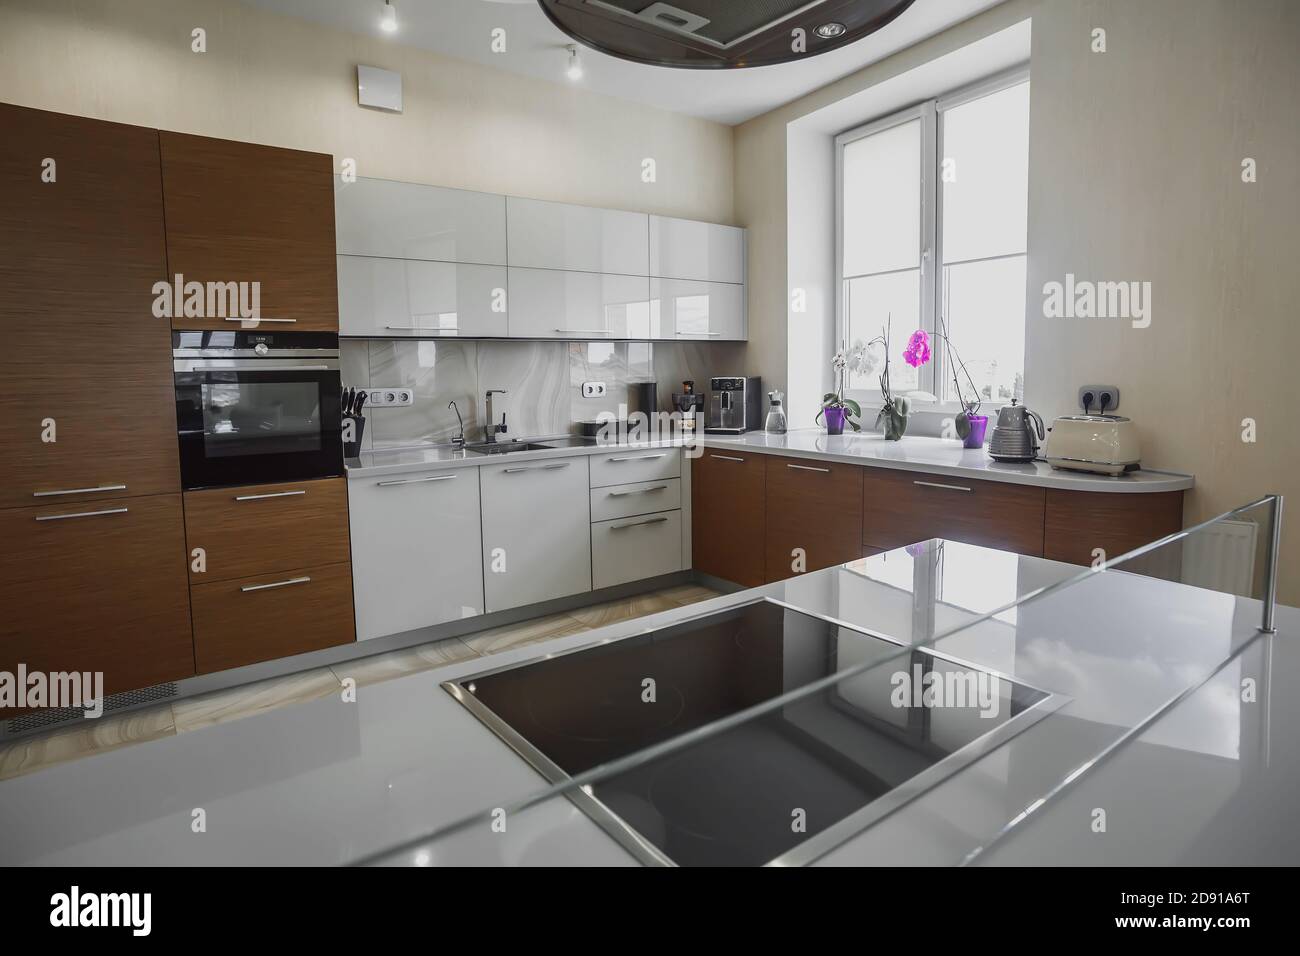 Electric Ceramic Stove Inside The Kitchen Home Interiors Stock Photo -  Download Image Now - iStock